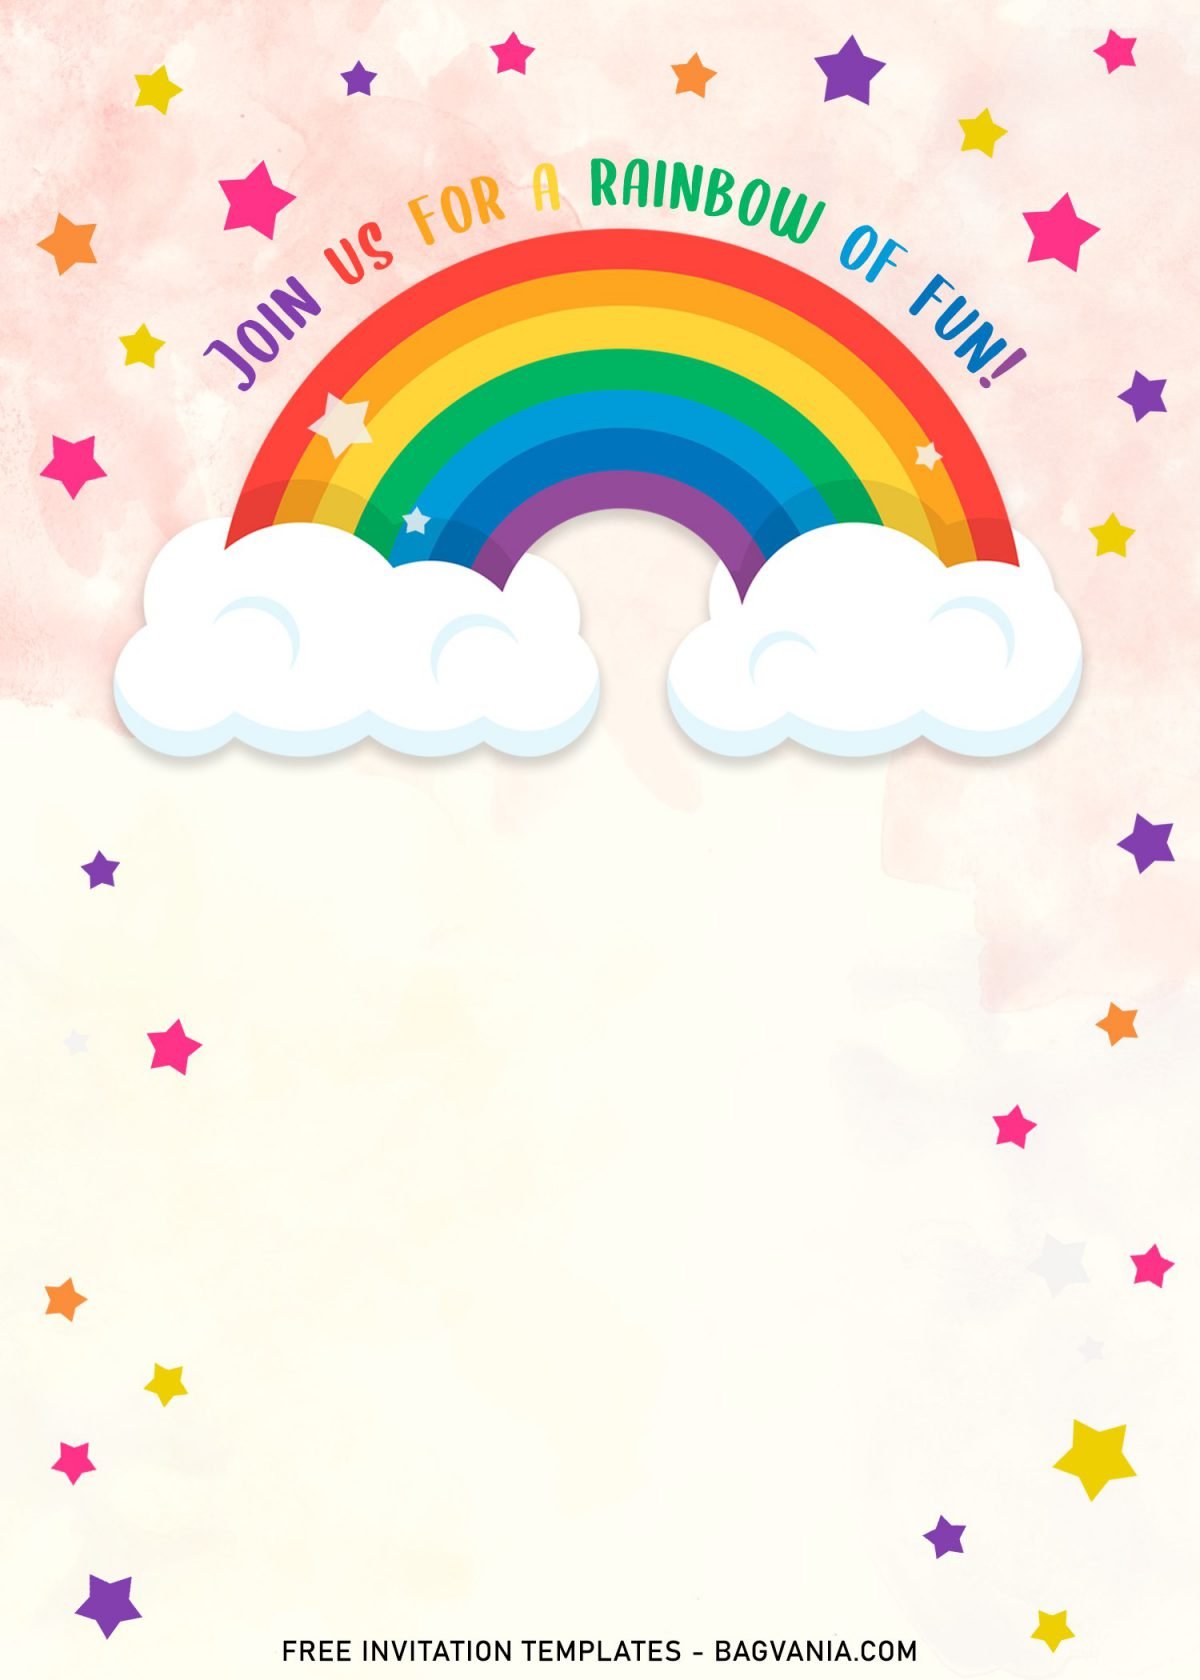 9+ Colorful Rainbow Invitation Card Templates For A Whimsical Birthday Party and has colorful design